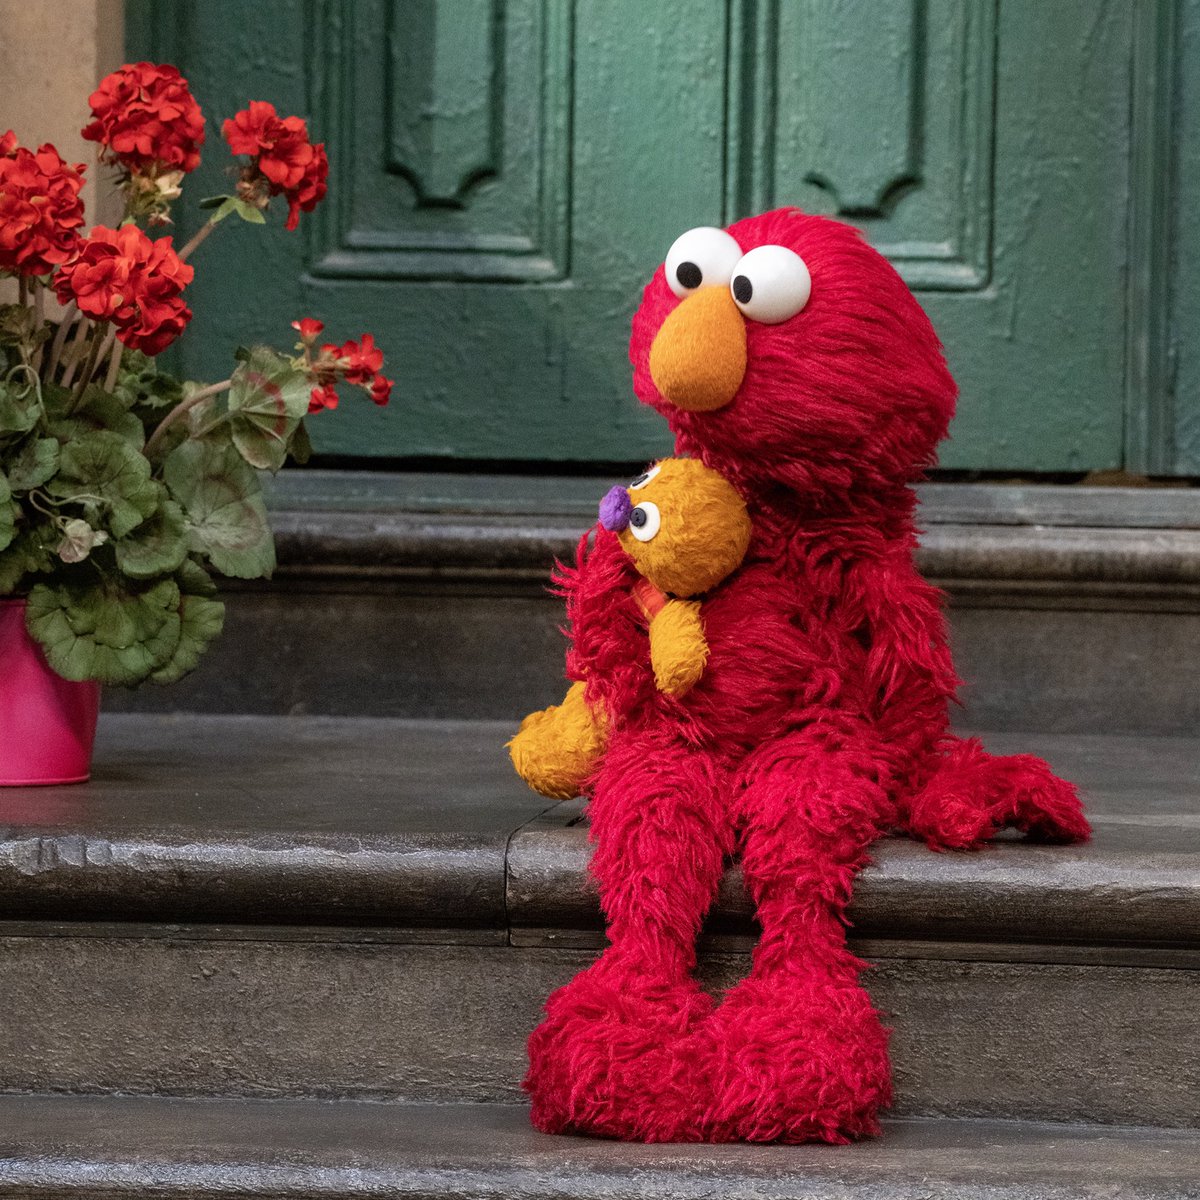 Elmo wishes somebody was here to play with Elmo. ❤️